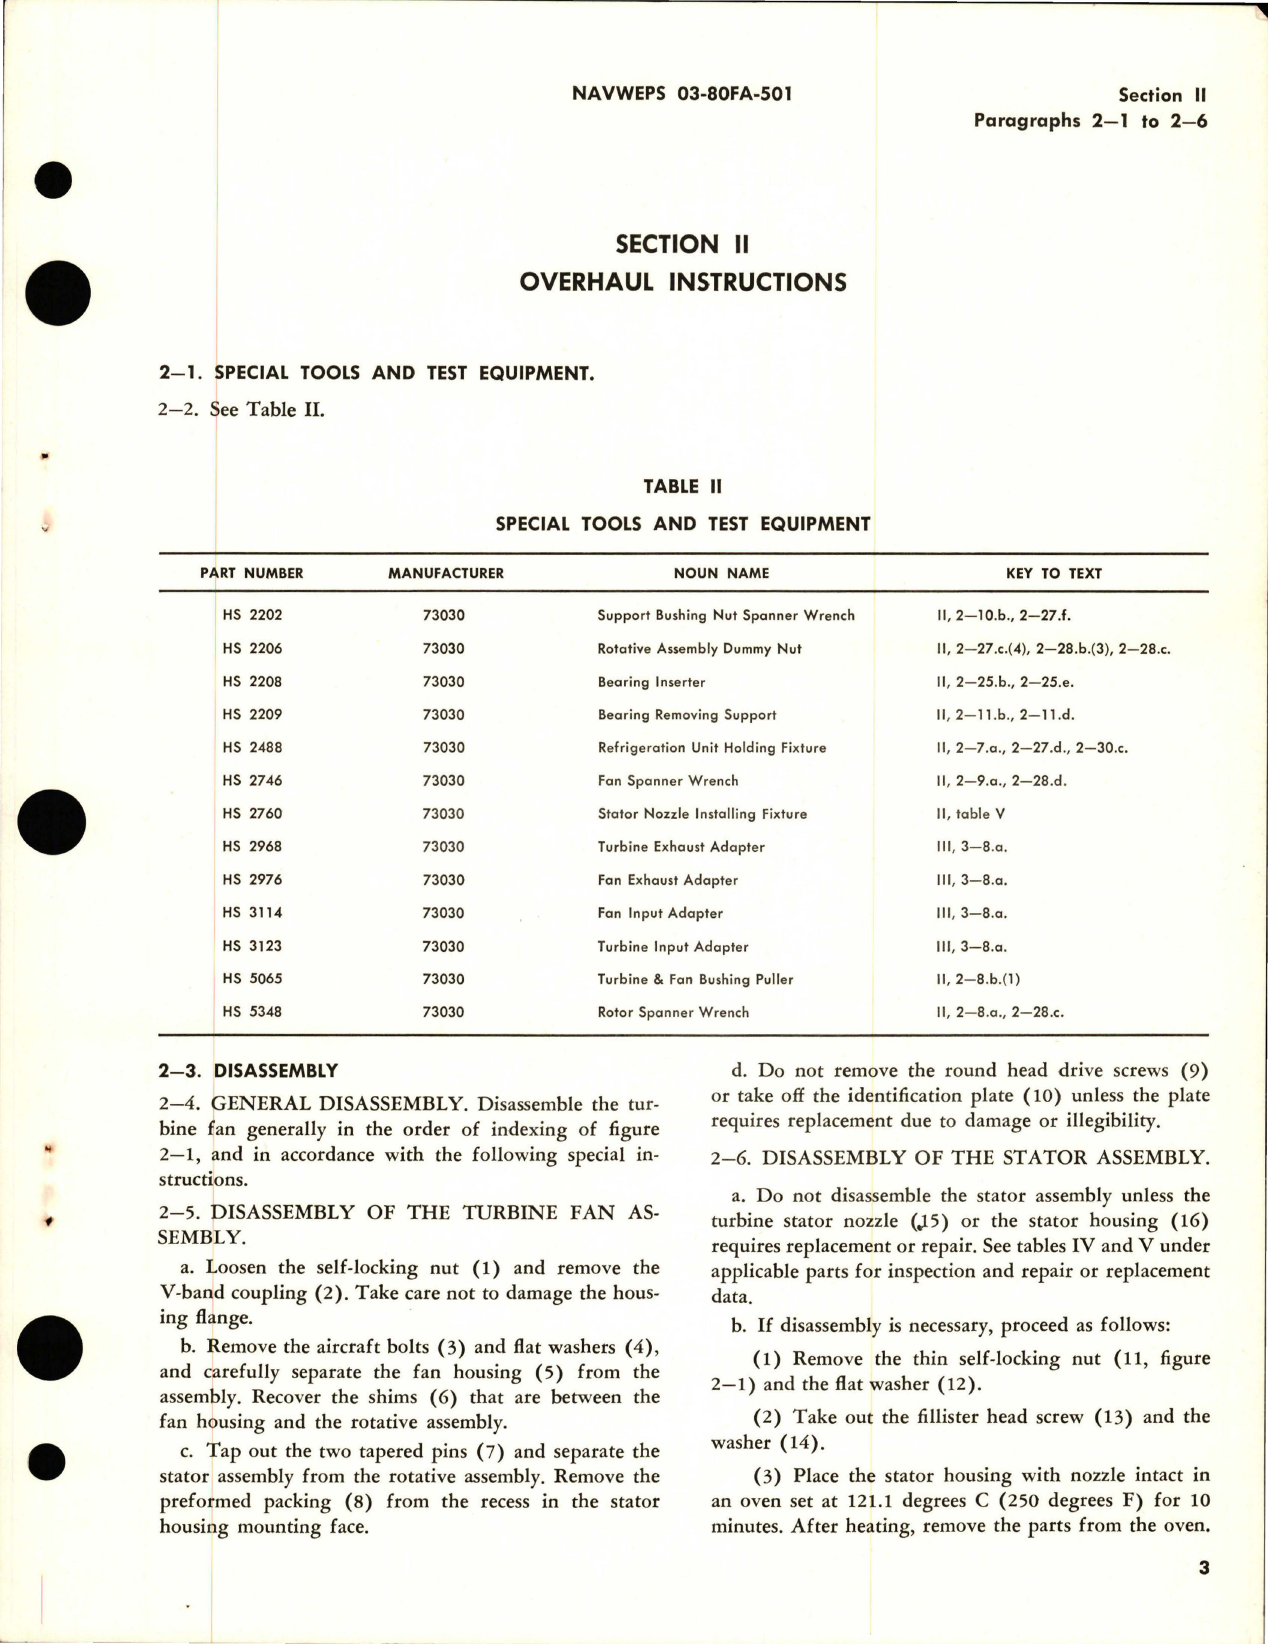 Sample page 7 from AirCorps Library document: Overhaul Instructions for Turbine Fan Assembly - Part 98821